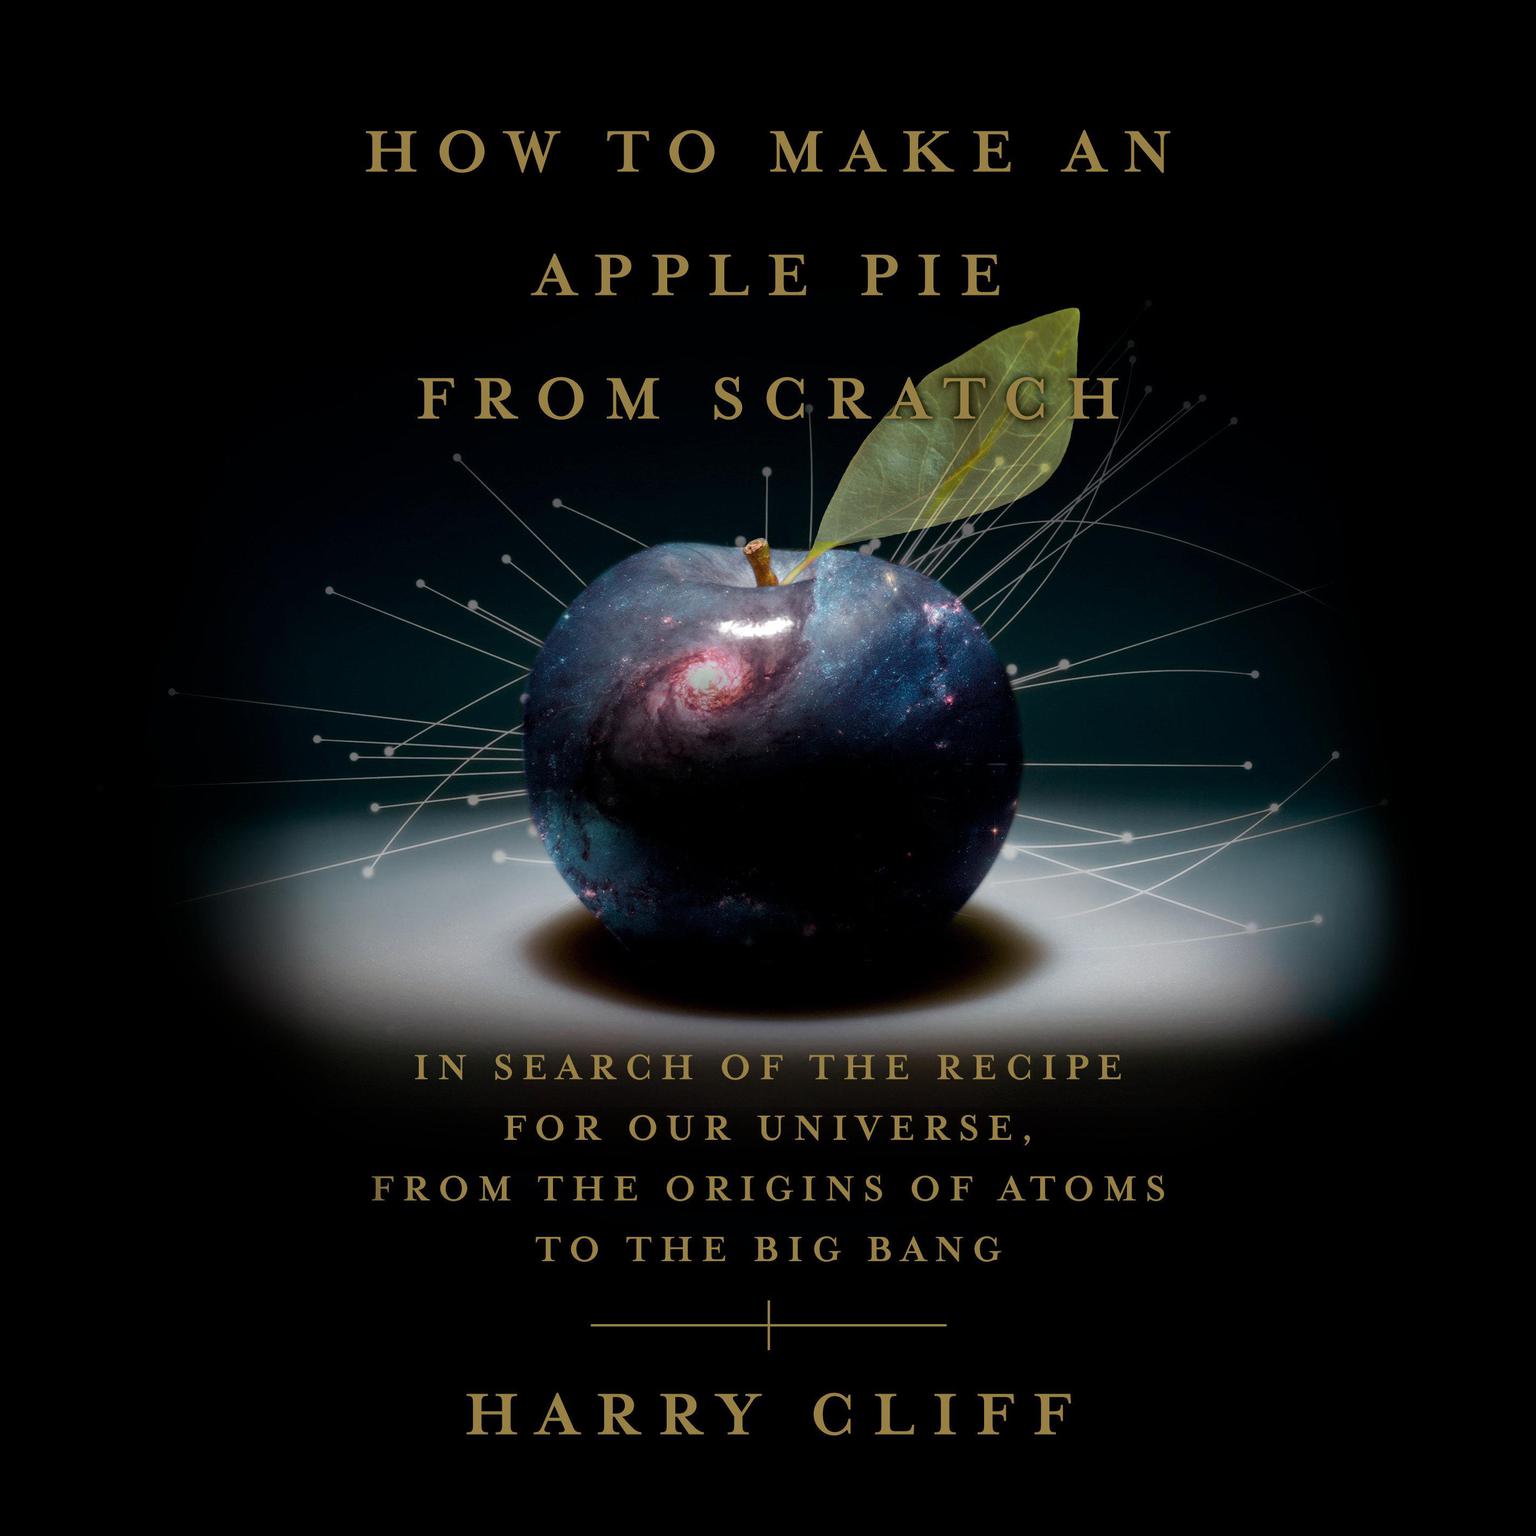 How to Make an Apple Pie from Scratch: In Search of the Recipe for Our Universe, from the Origins of Atoms to the Big Bang Audiobook, by Harry Cliff